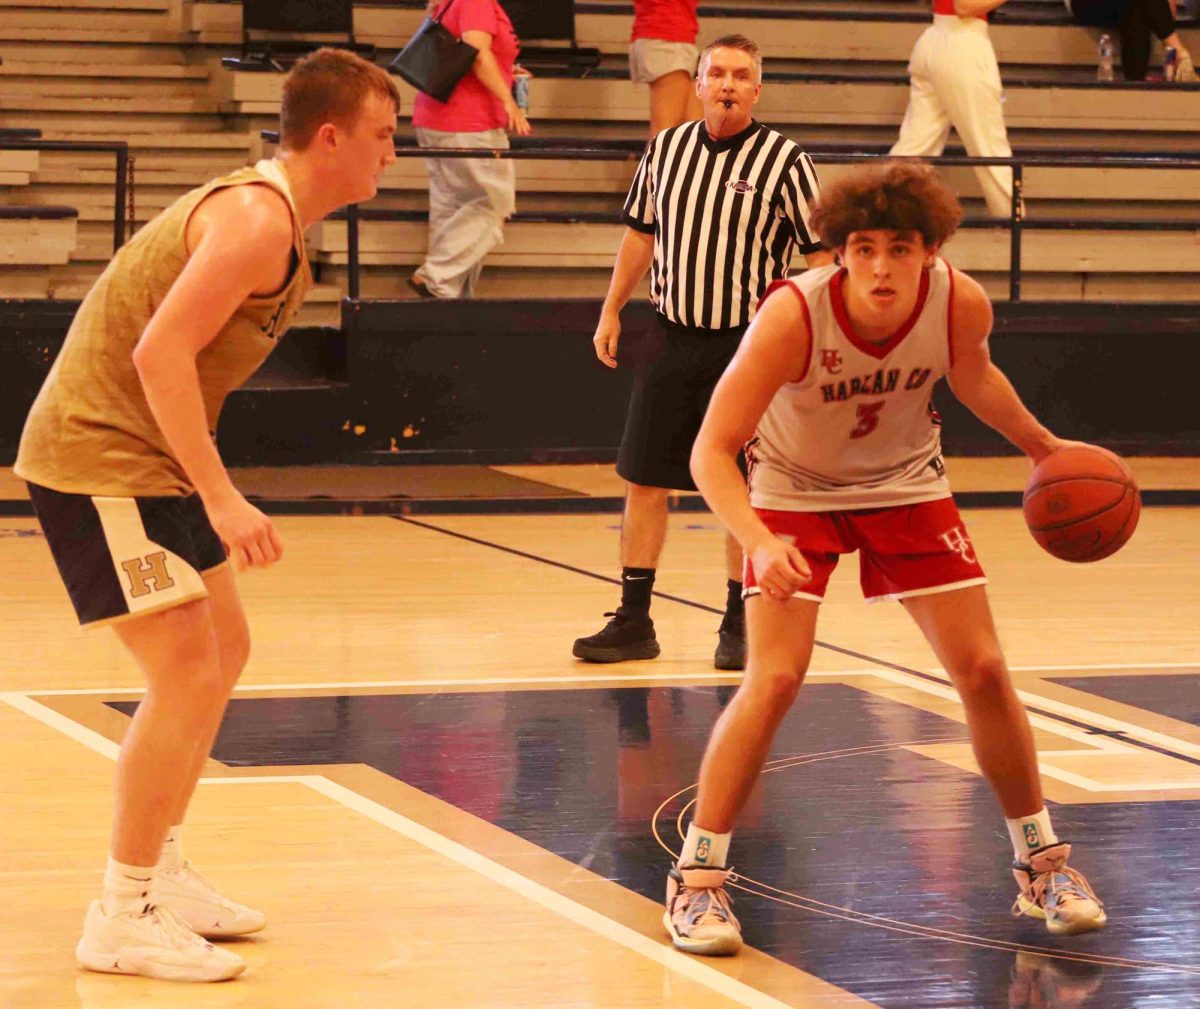 Harlan County senior guard Maddox Huff scored 32 points against Perry Central and 25 against Hazard as the Bears opened their summer schedule Thursday at Hazard.